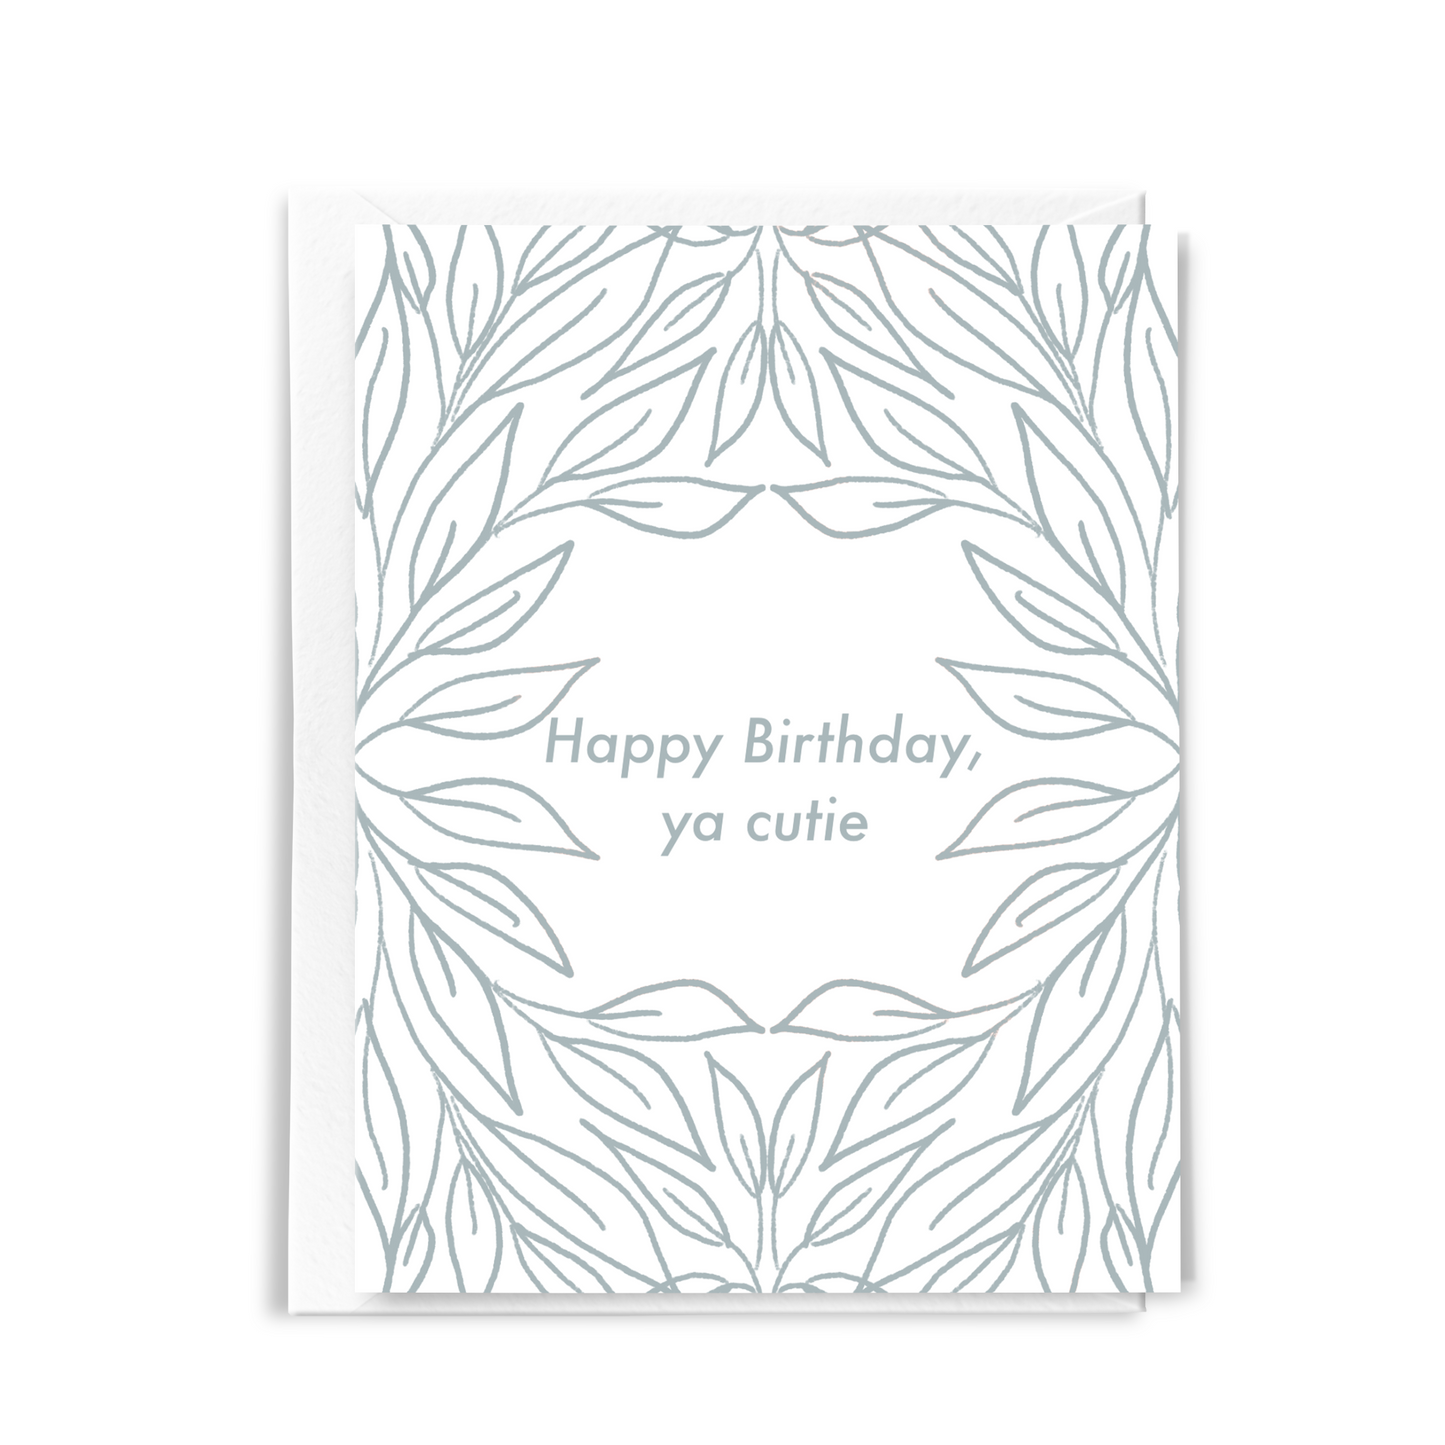 simple and sweet birthday card for friend